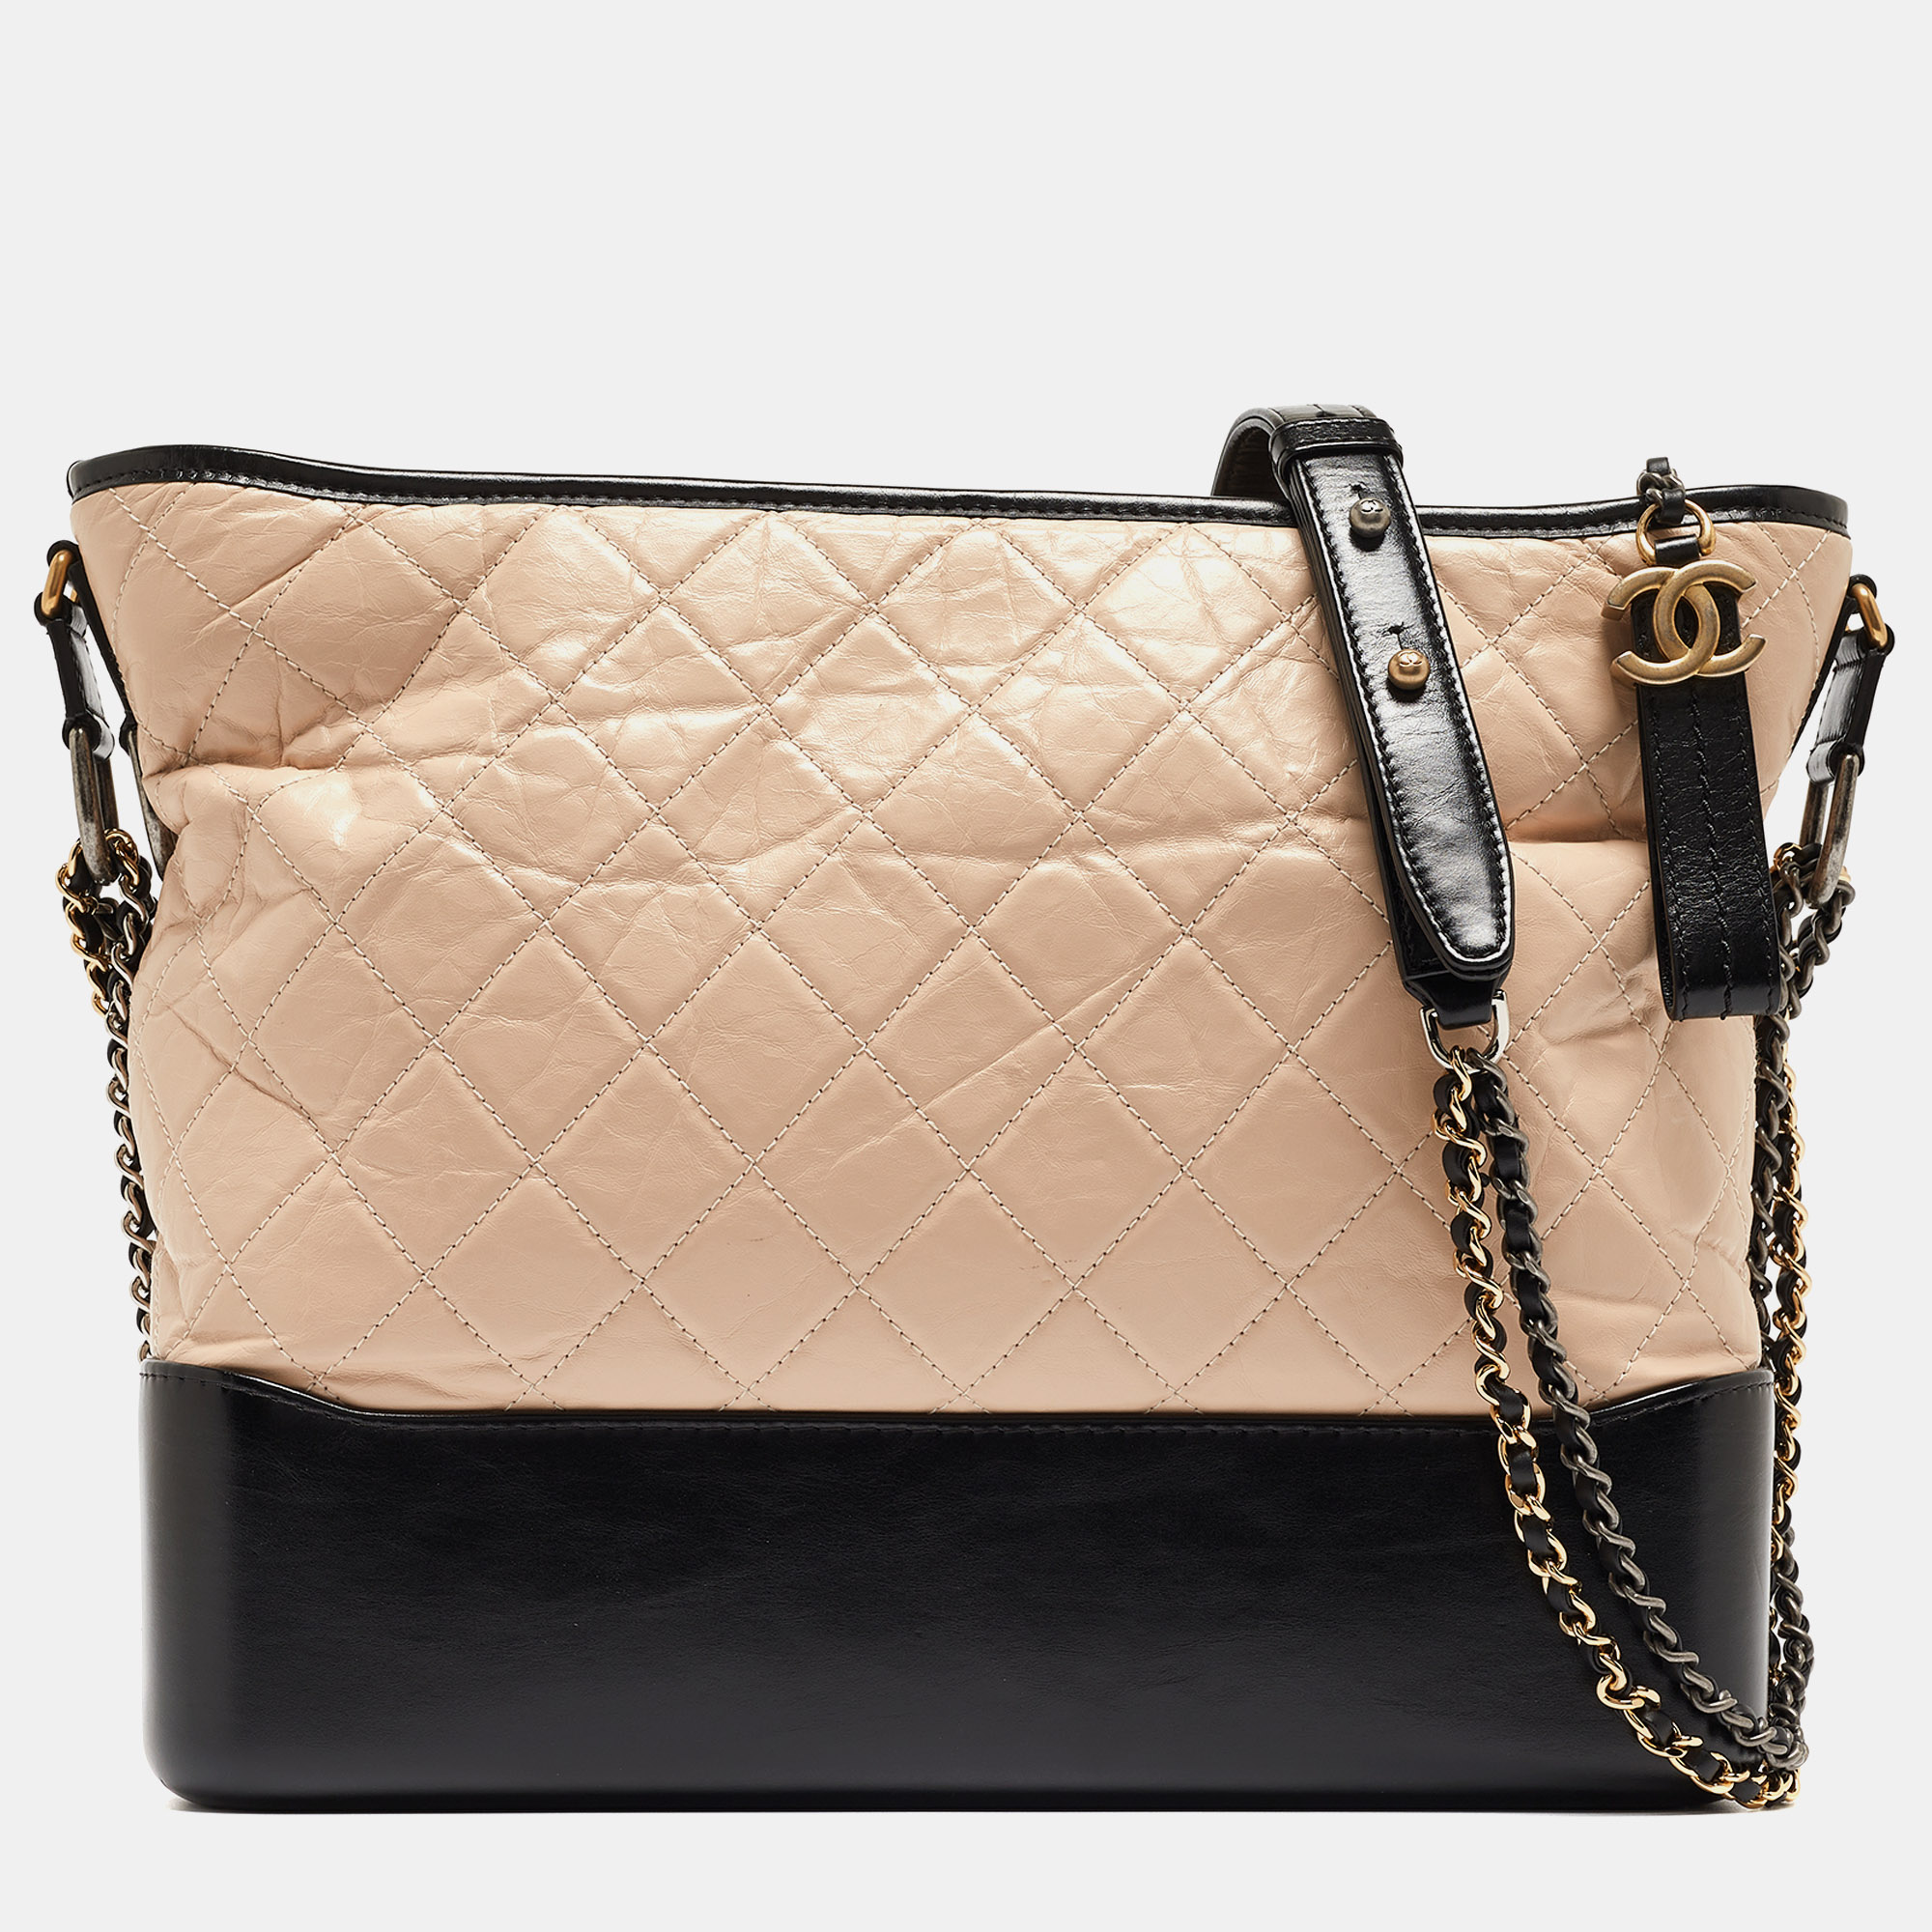 Embrace timeless allure with the Chanel Gabrielle hobo. Crafted with meticulous attention to detail this hobo bag boasts a classic quilted leather design in contrasting hues exuding effortless chic. Its spacious interior and adjustable strap offer both style and practicality for the modern sophisticate.